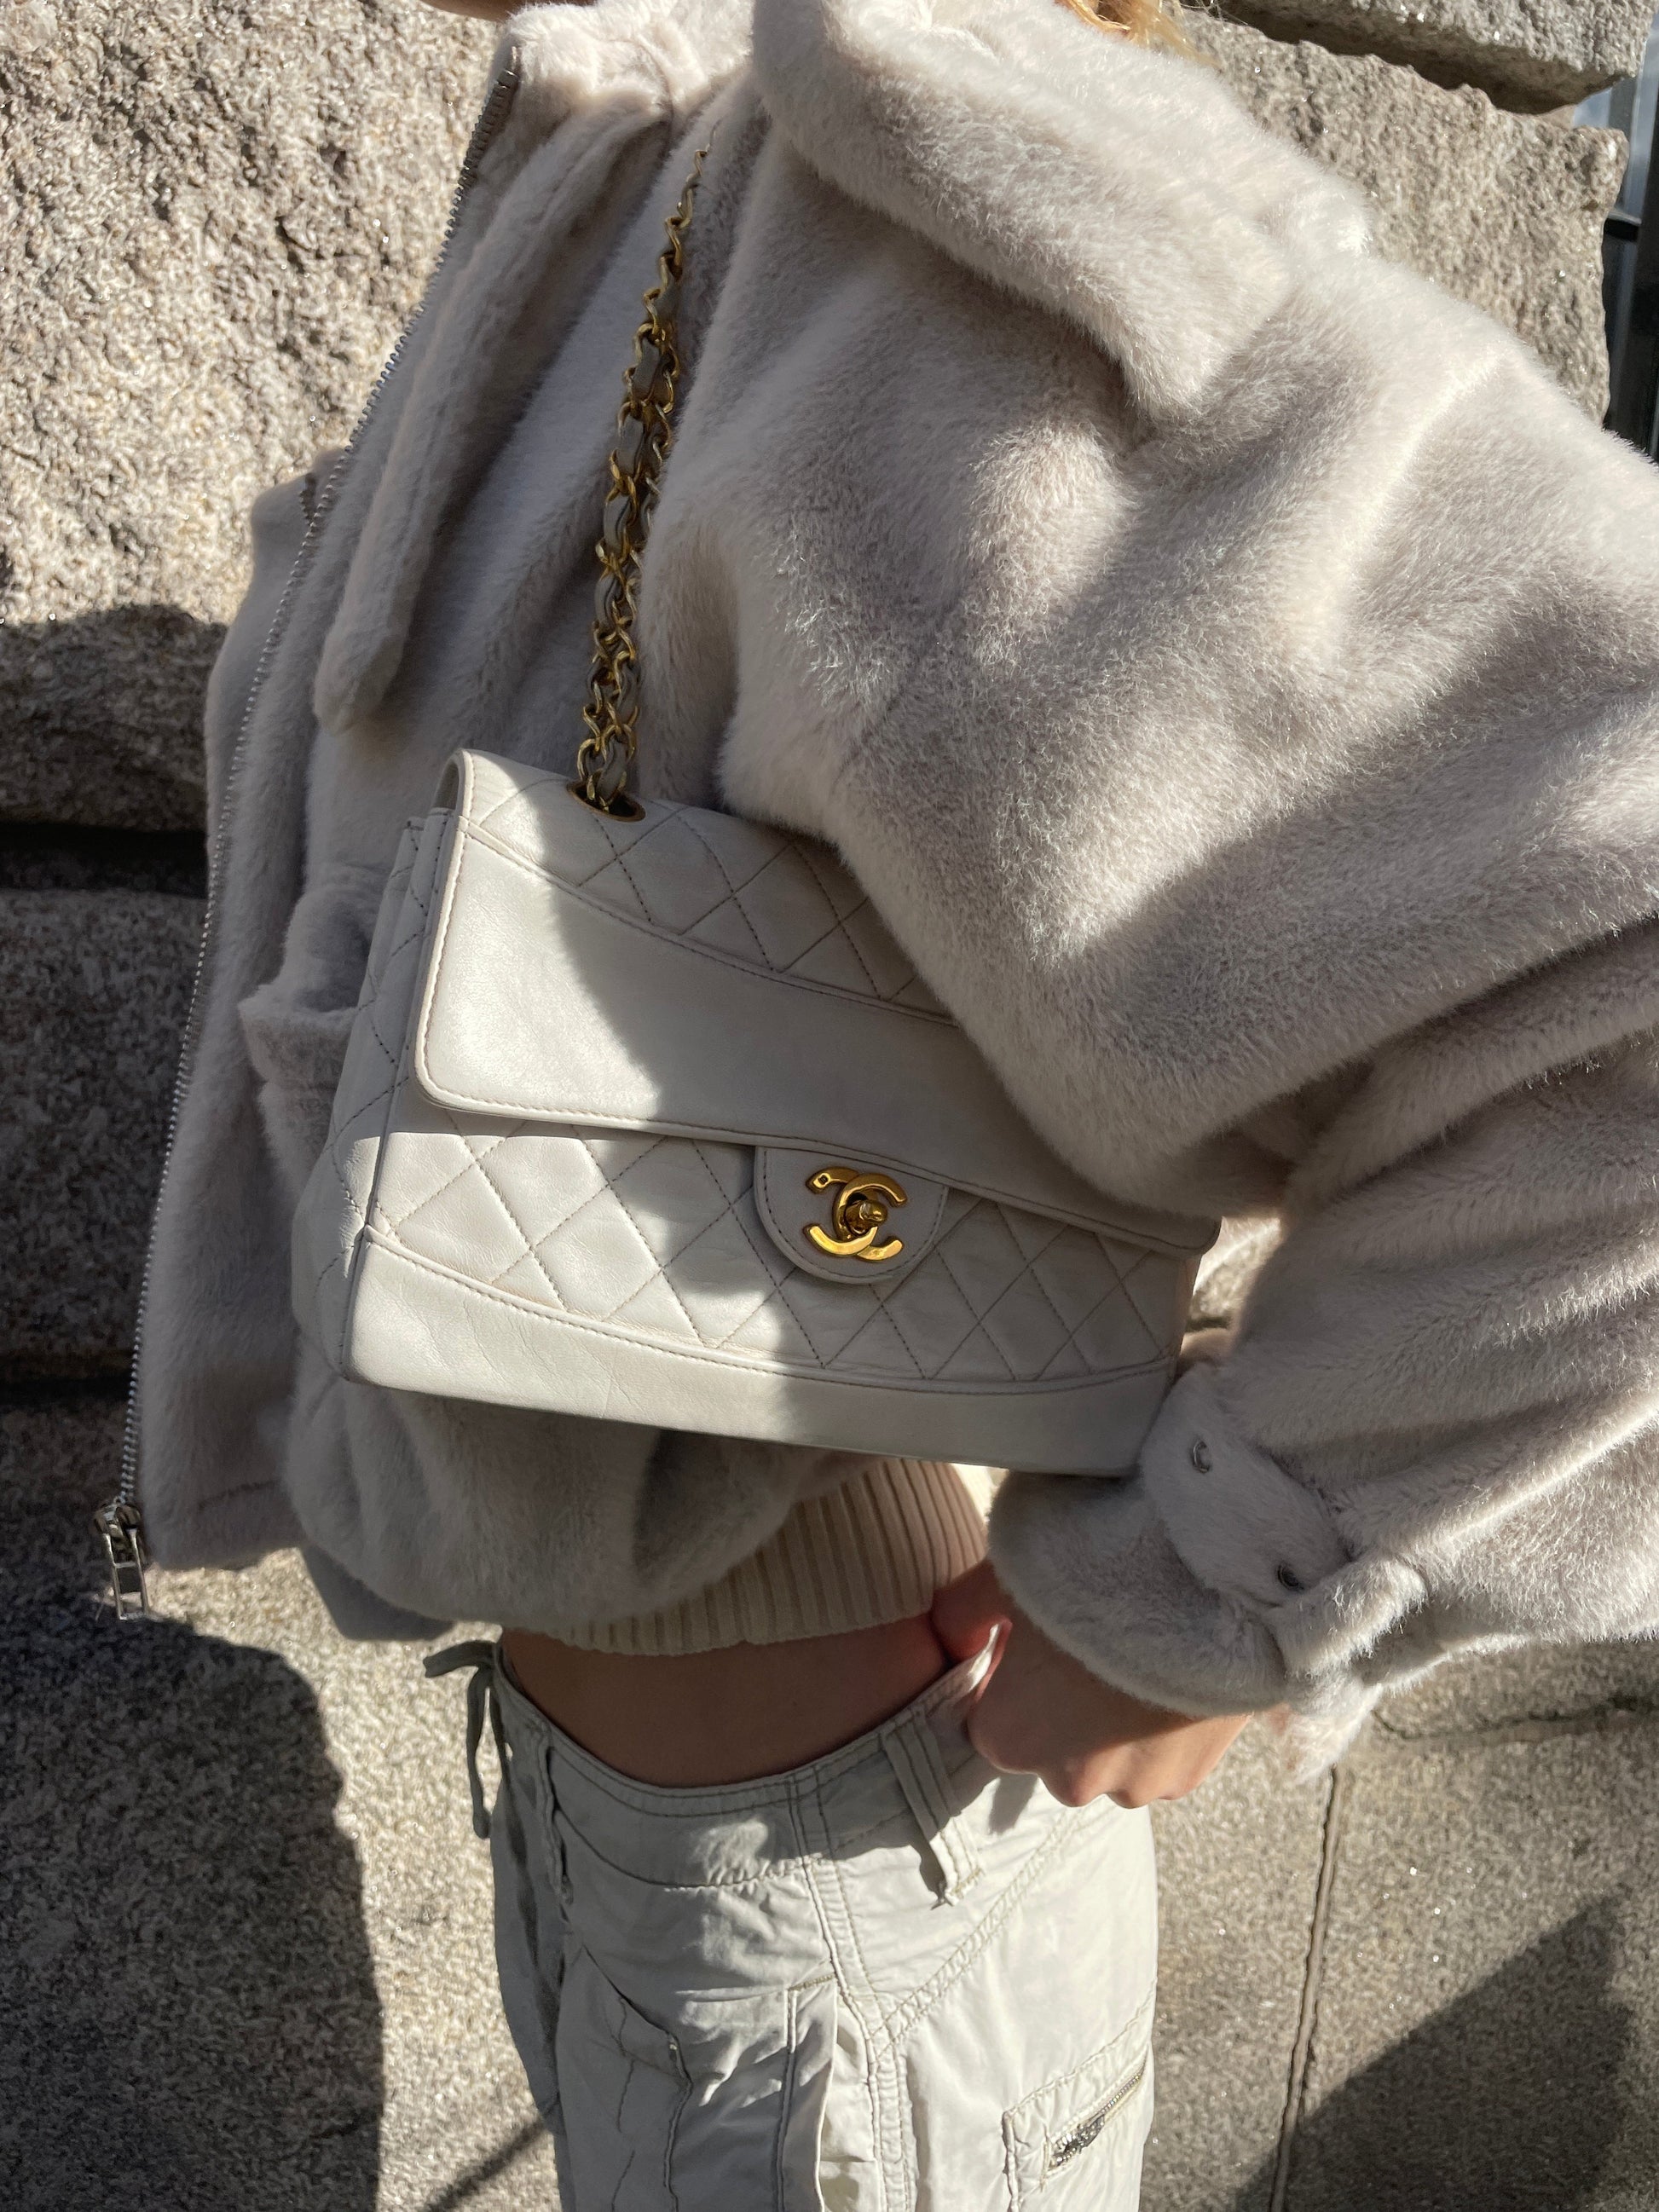 CHANEL Small Classic Flap Bag Review